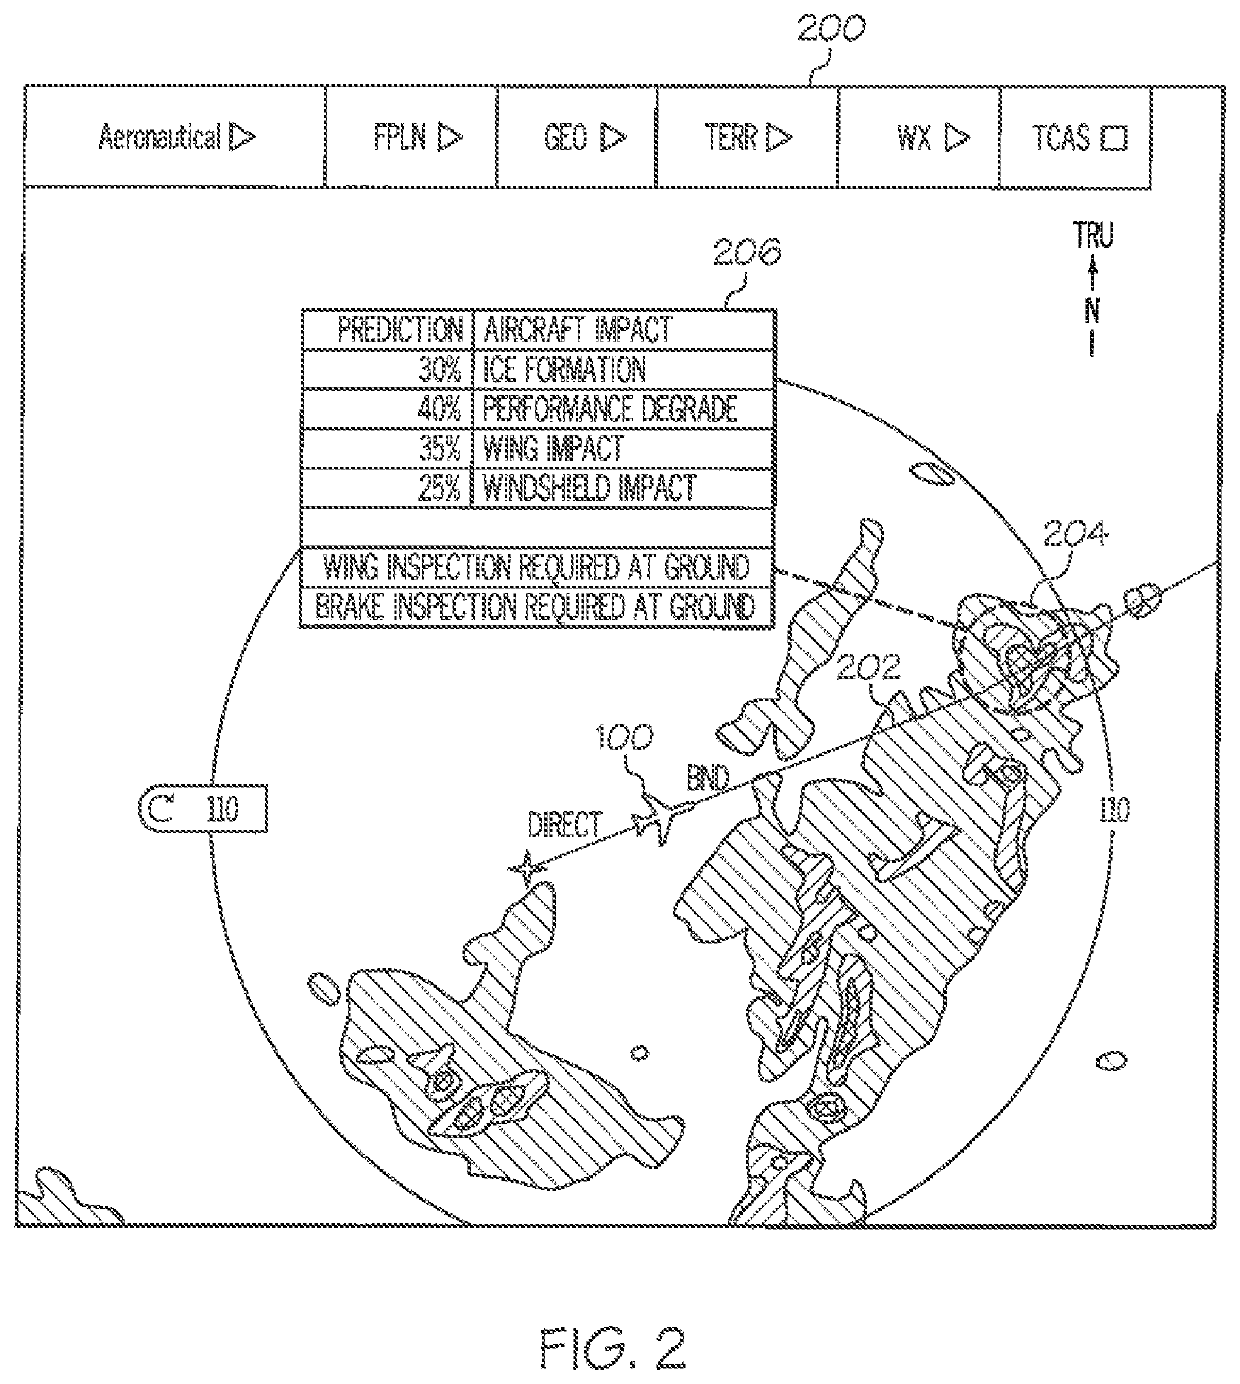 Systems and methods for predicting weather impact on an aircraft